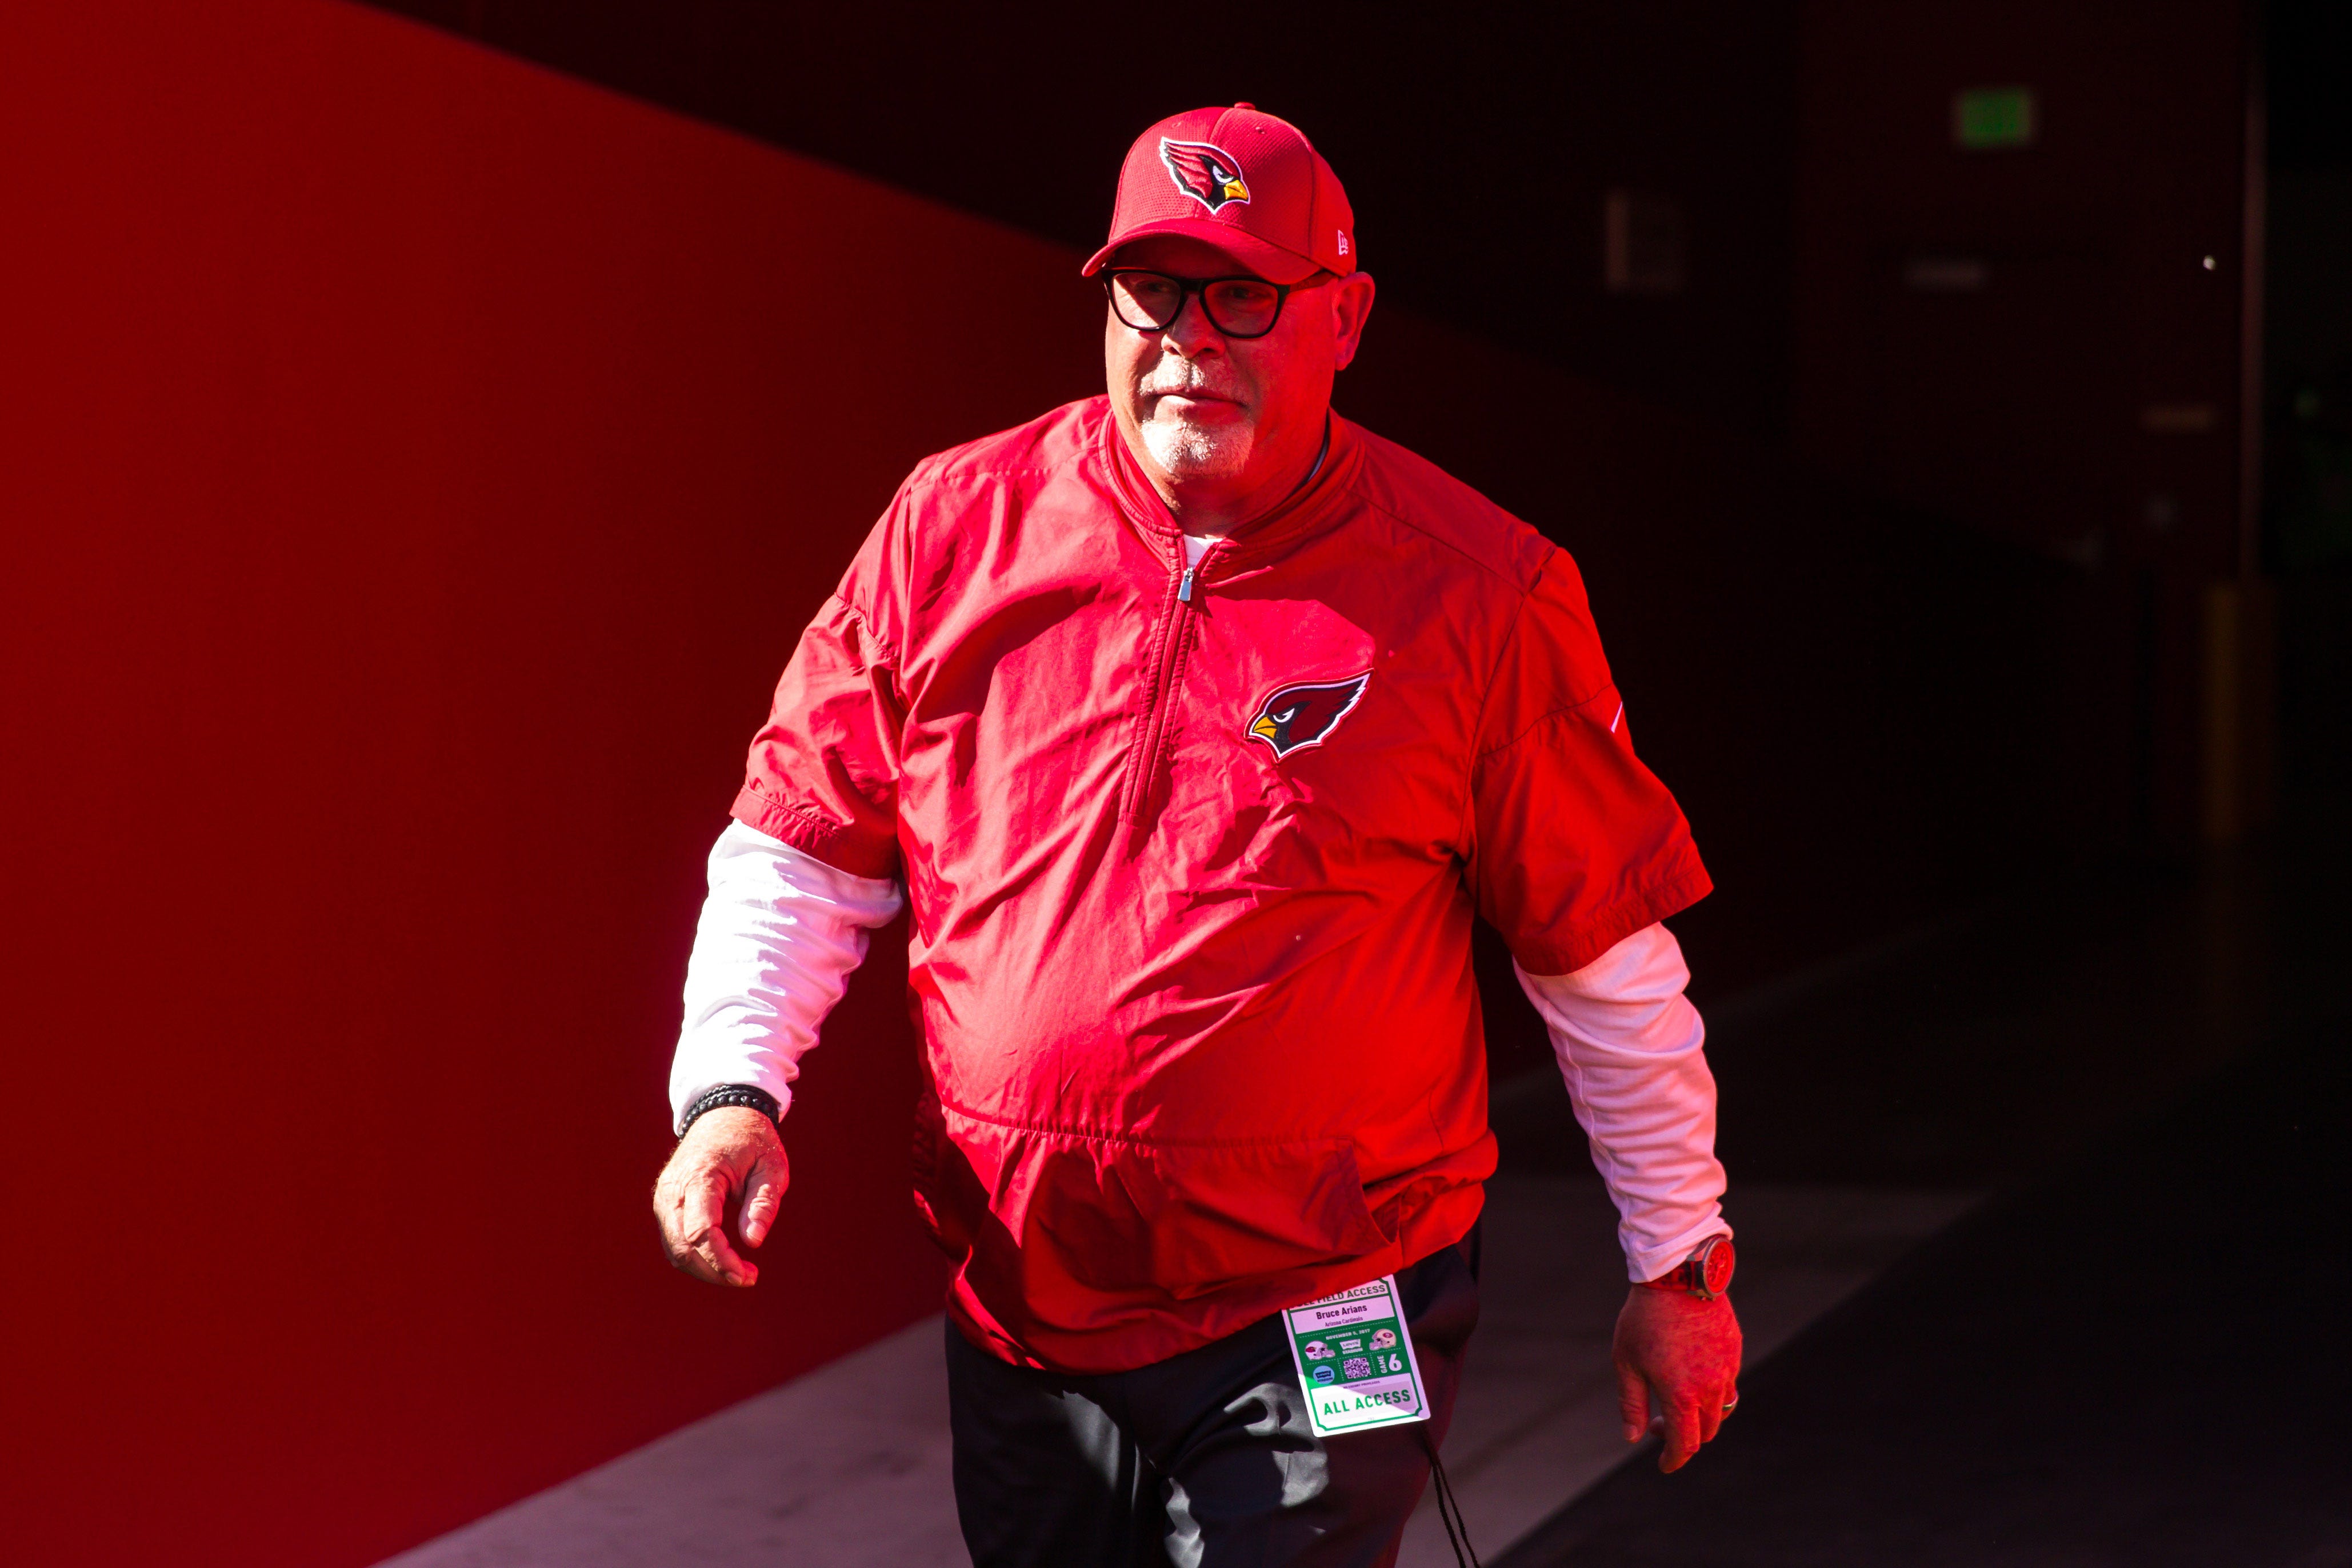 NFL: Bruce Arians hired as Buccaneers' head coach